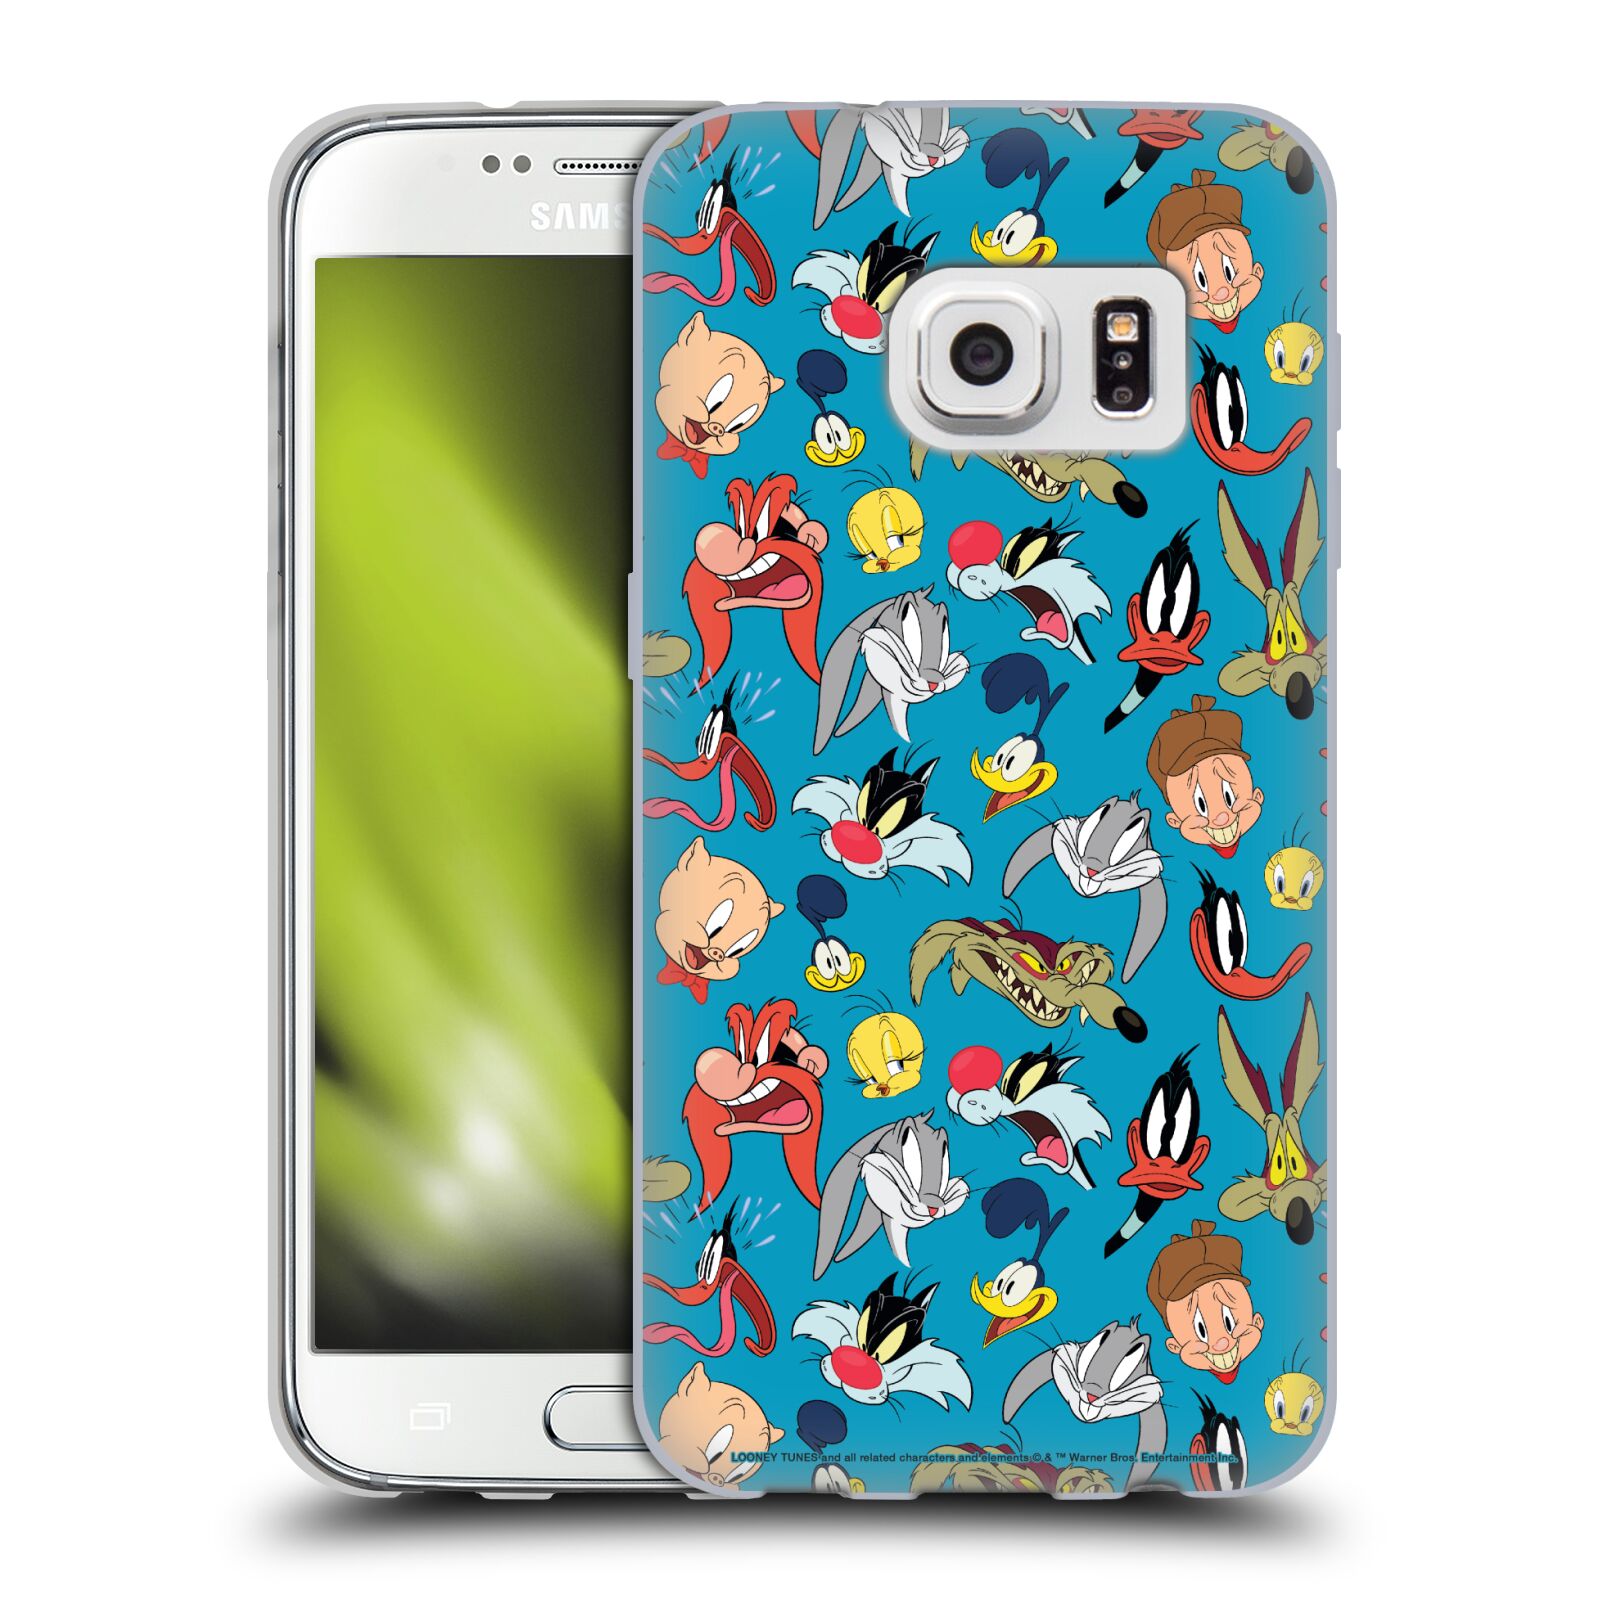 Head Case Designs Officially Licensed Looney Tunes Patterns Head Shots Soft Gel Case Compatible with Samsung Galaxy S7 - image 1 of 7